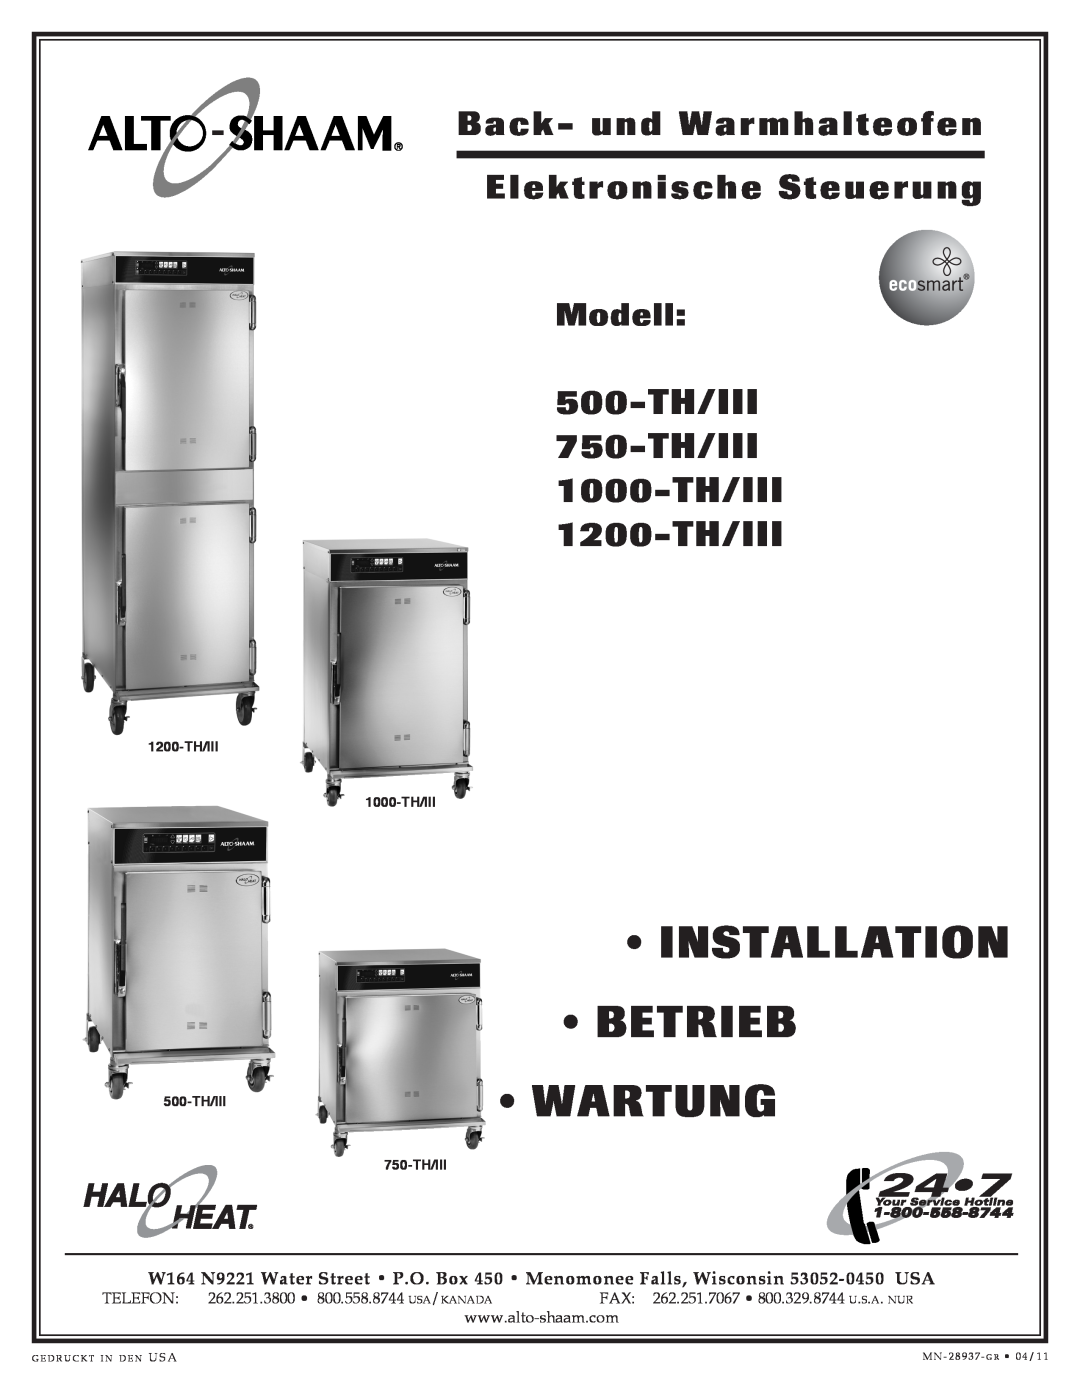 Alto-Shaam 500-TH/III manual Installation, Operation, Maintenance, Cook & Hold Oven, Electronic Control, 300-TH/III, Model 